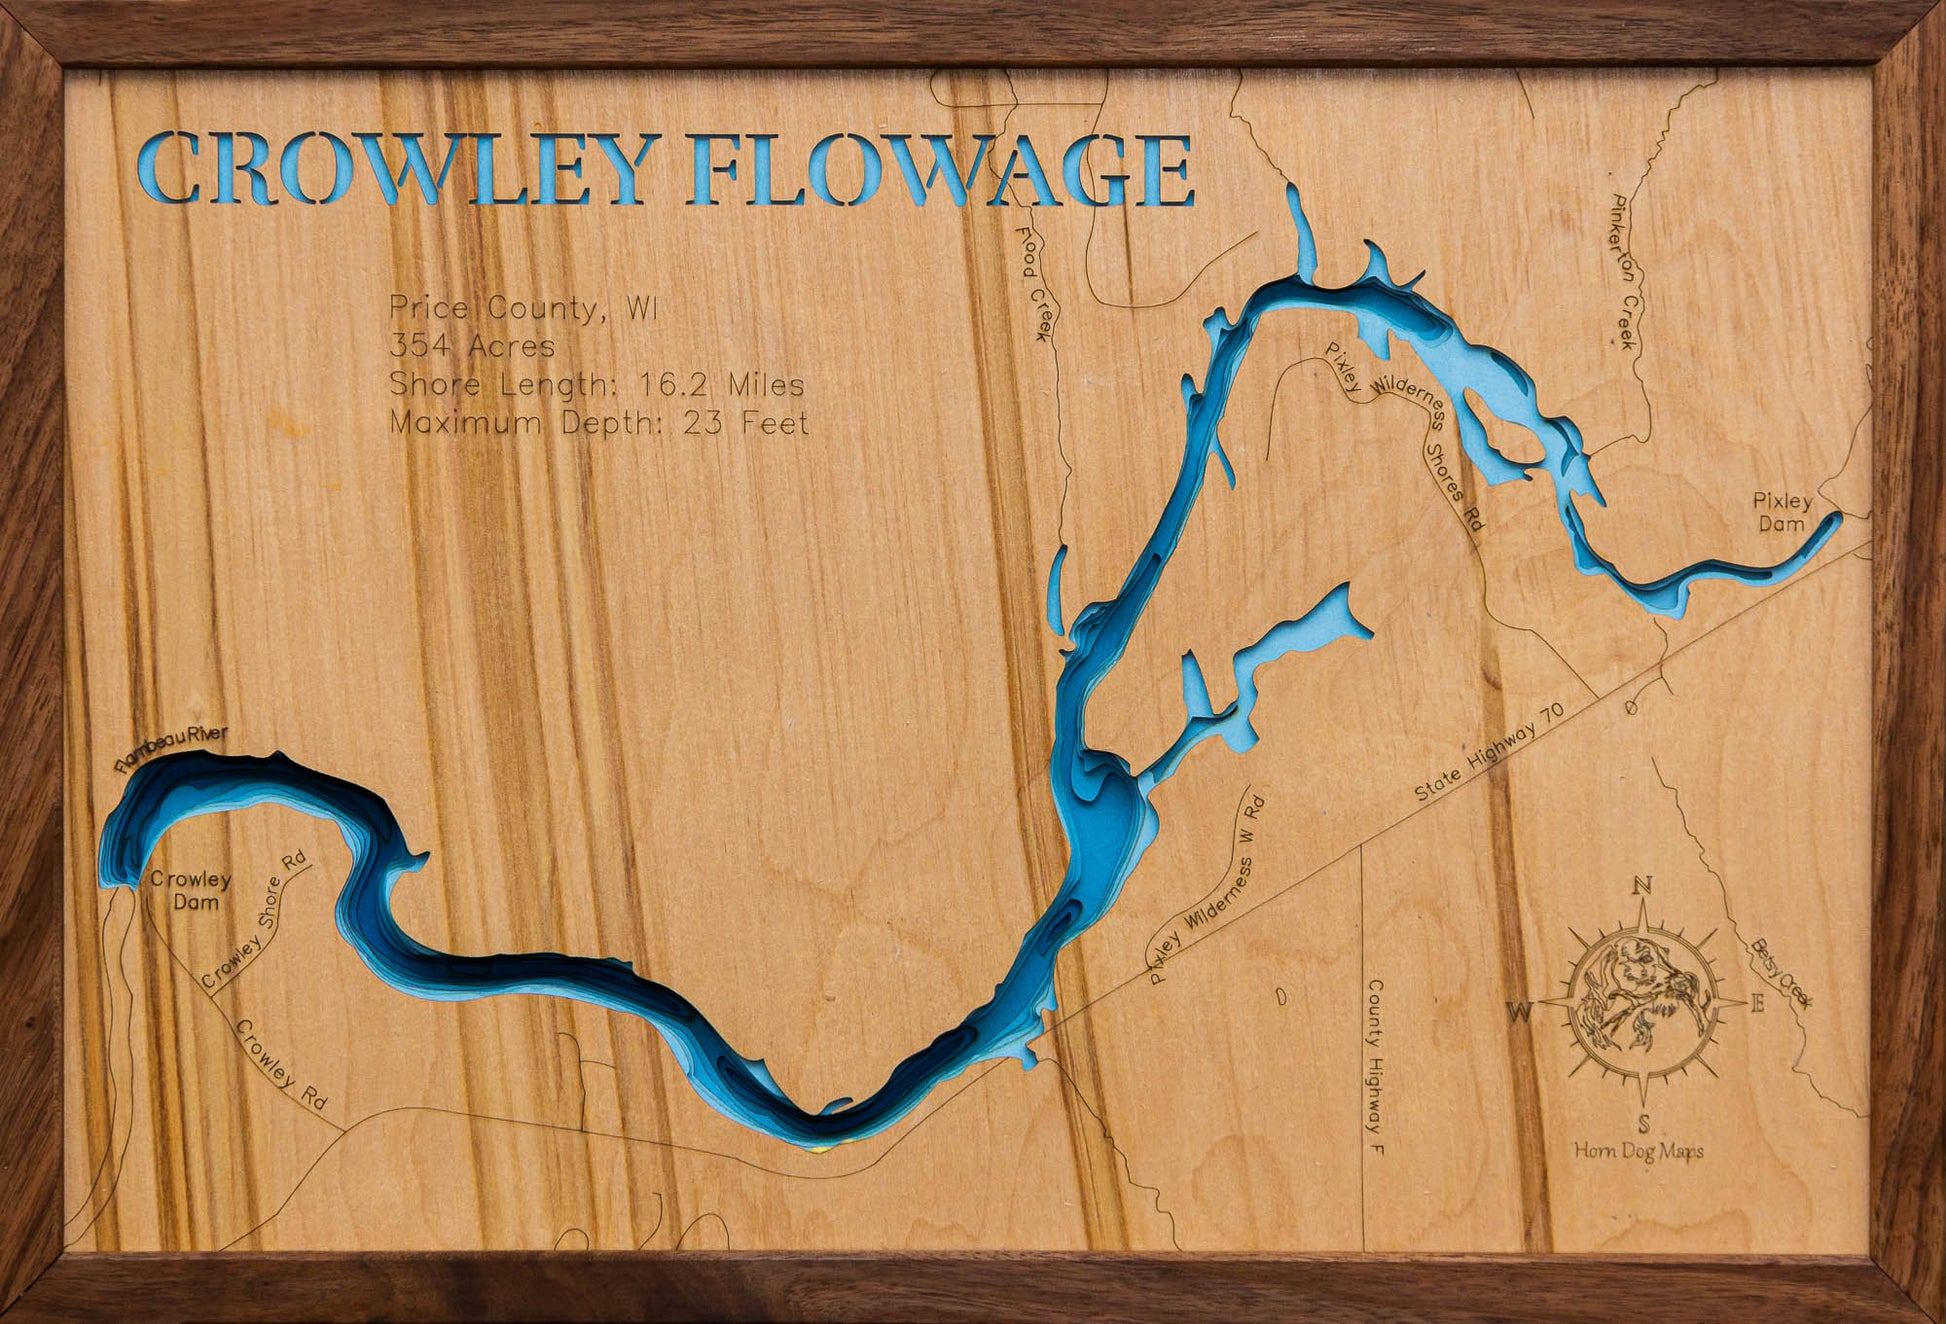 Crowley Flowage in Price County, WI